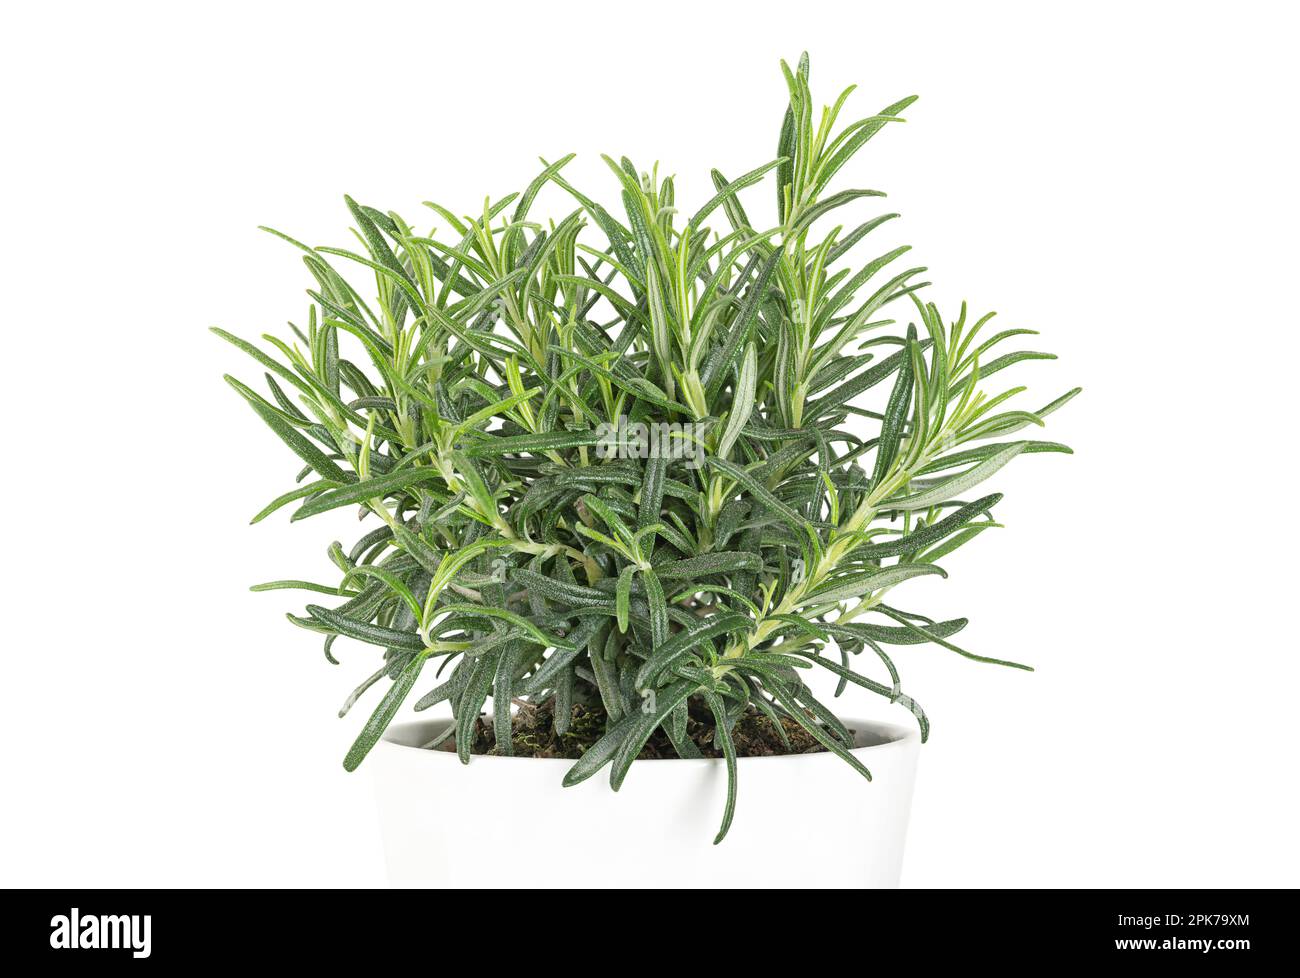 Rosemary, young plant in a white pot. Salvia rosmarinus, an aromatic, evergreen shrub with fragrant needle-like green leaves. Stock Photo